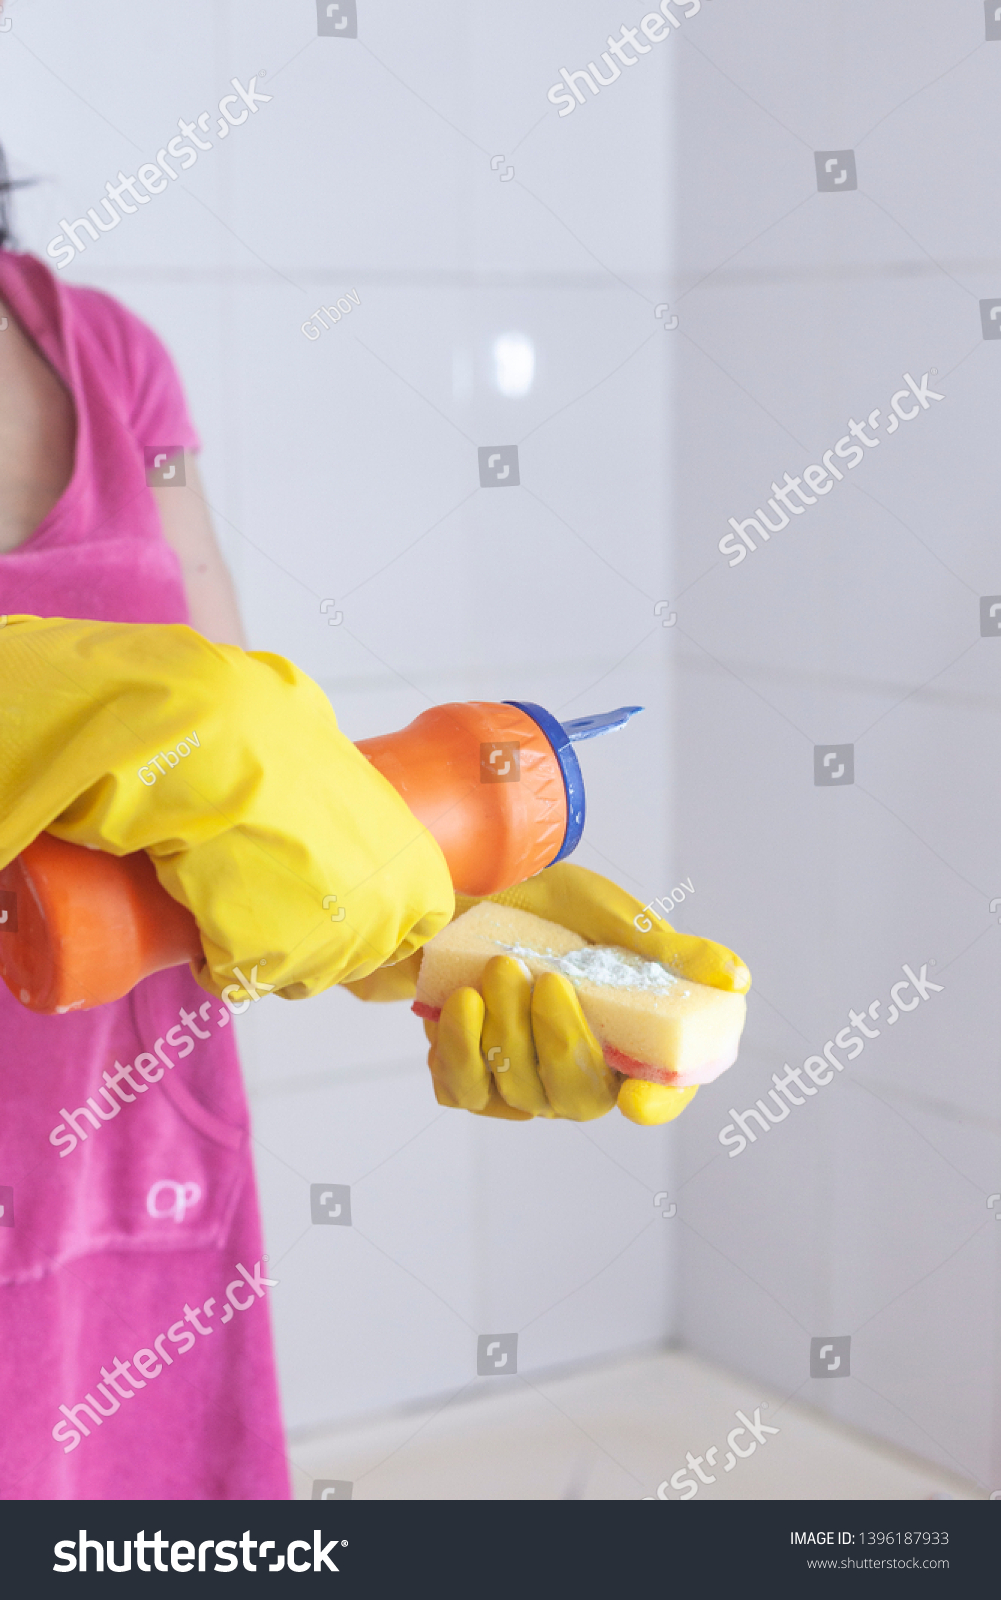 Young woman equipped with chemical cleaner bottle and sponge. Housekeeping and cleaning concept. Women preparing to clean up bathroom #1396187933